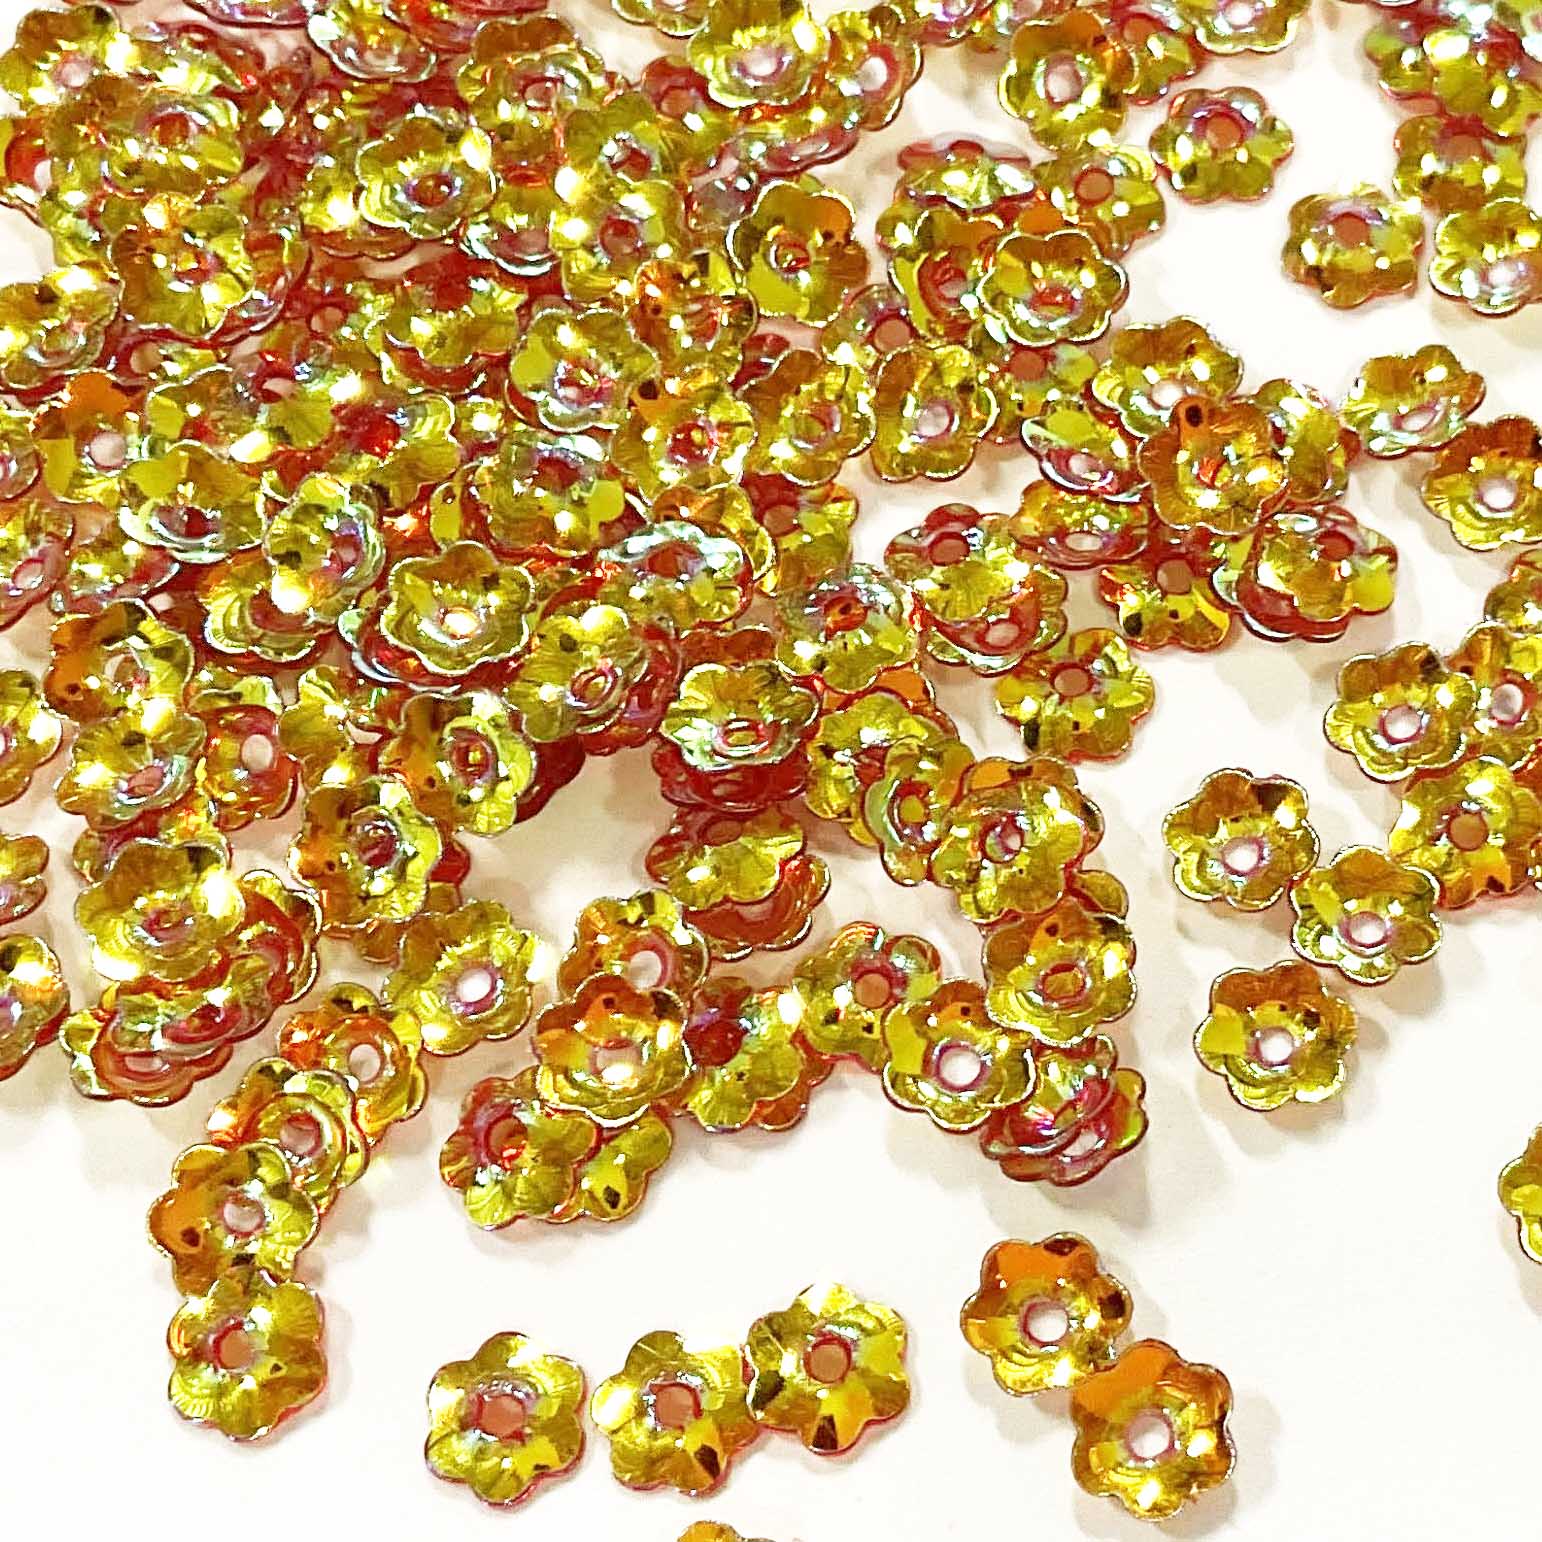 www.colourstreams.com.au Colour Streams Sequins Embellishments Costumes Mardi Gras Dancing Ballet Theatre Shows Drag Queen Bling S152 Flower Red Gold Lights Iridescent Reflective Golds Reds 6mm 